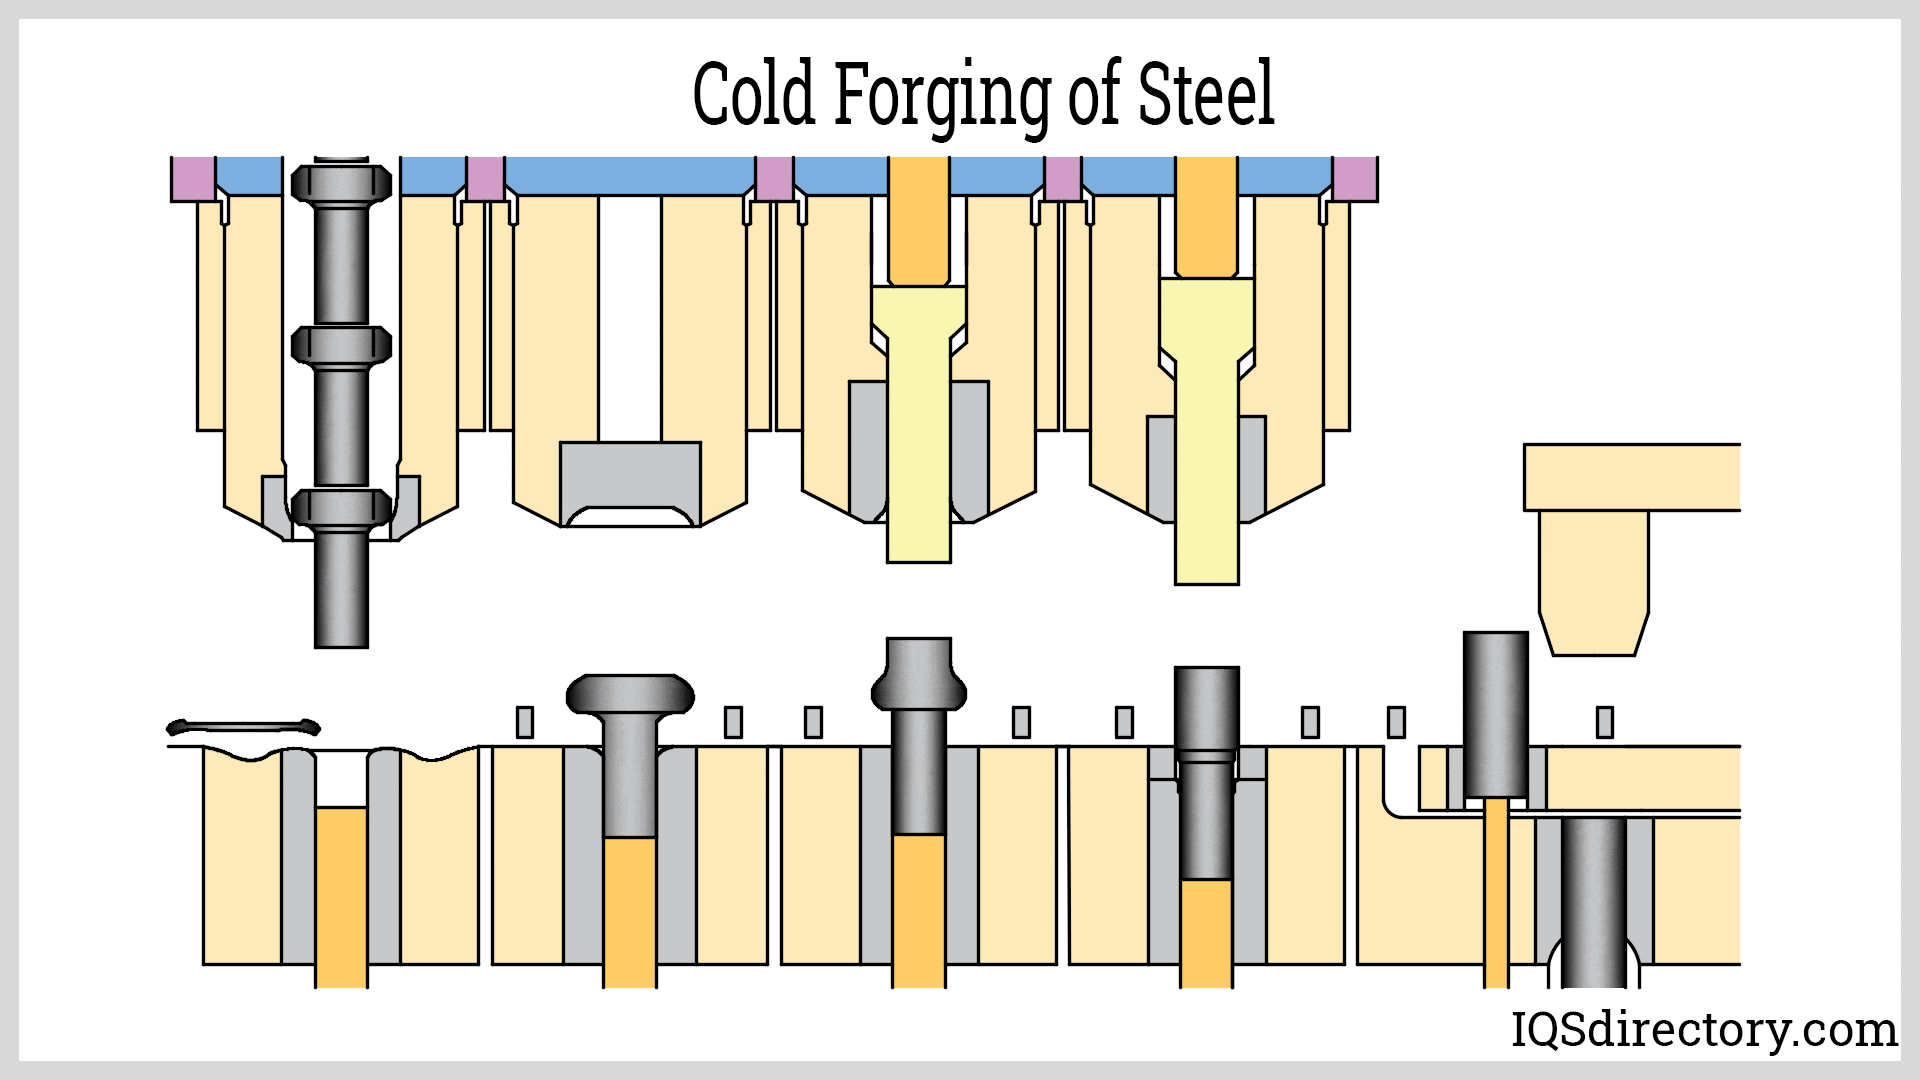 Cold Forging of Steel